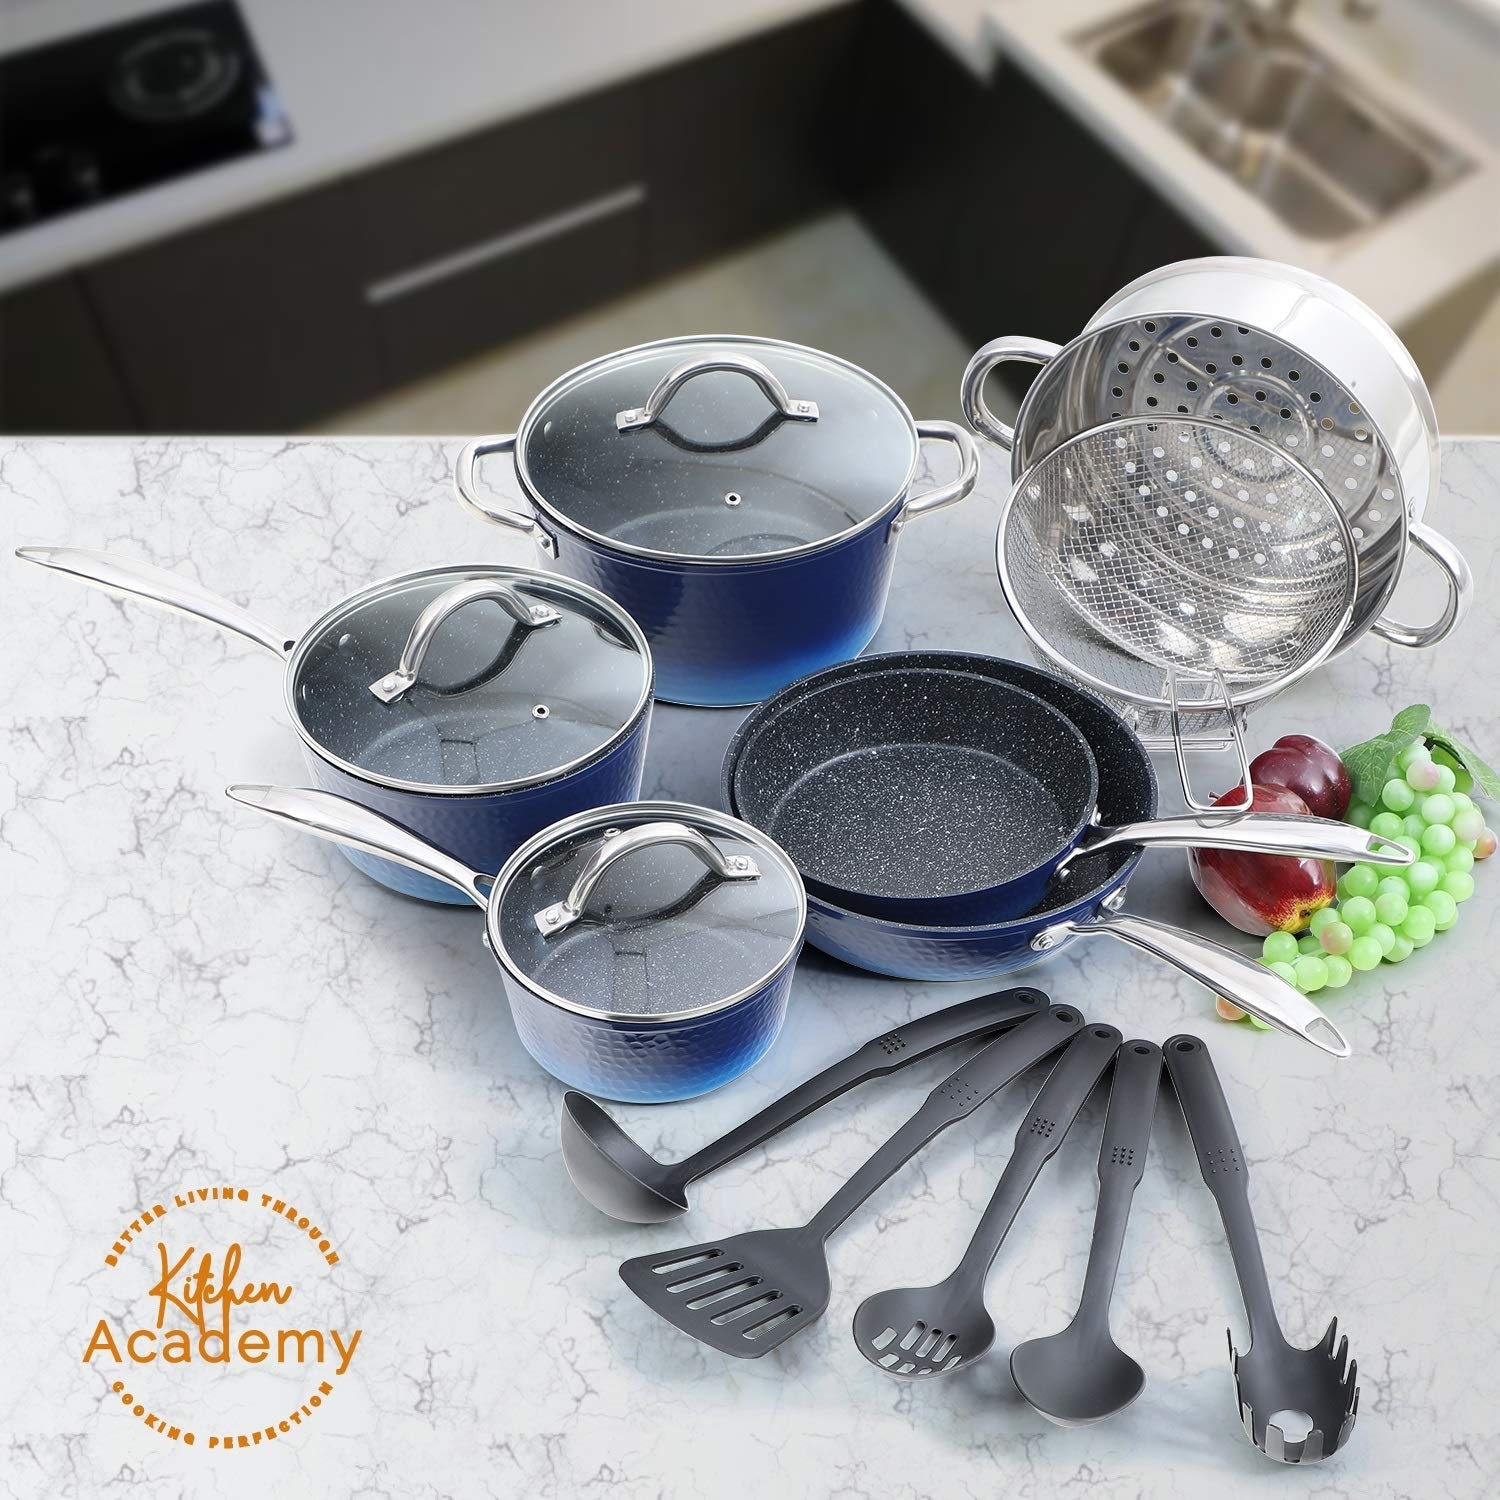 https://ak1.ostkcdn.com/images/products/is/images/direct/d4593209680e47c383de063b6260ed70ce60e861/Kitchen-Academy-15-Piece-Nonstick-Granite-Coated-Cookware-Set-Suitable-for-All-Stove-Including-Induction.jpg